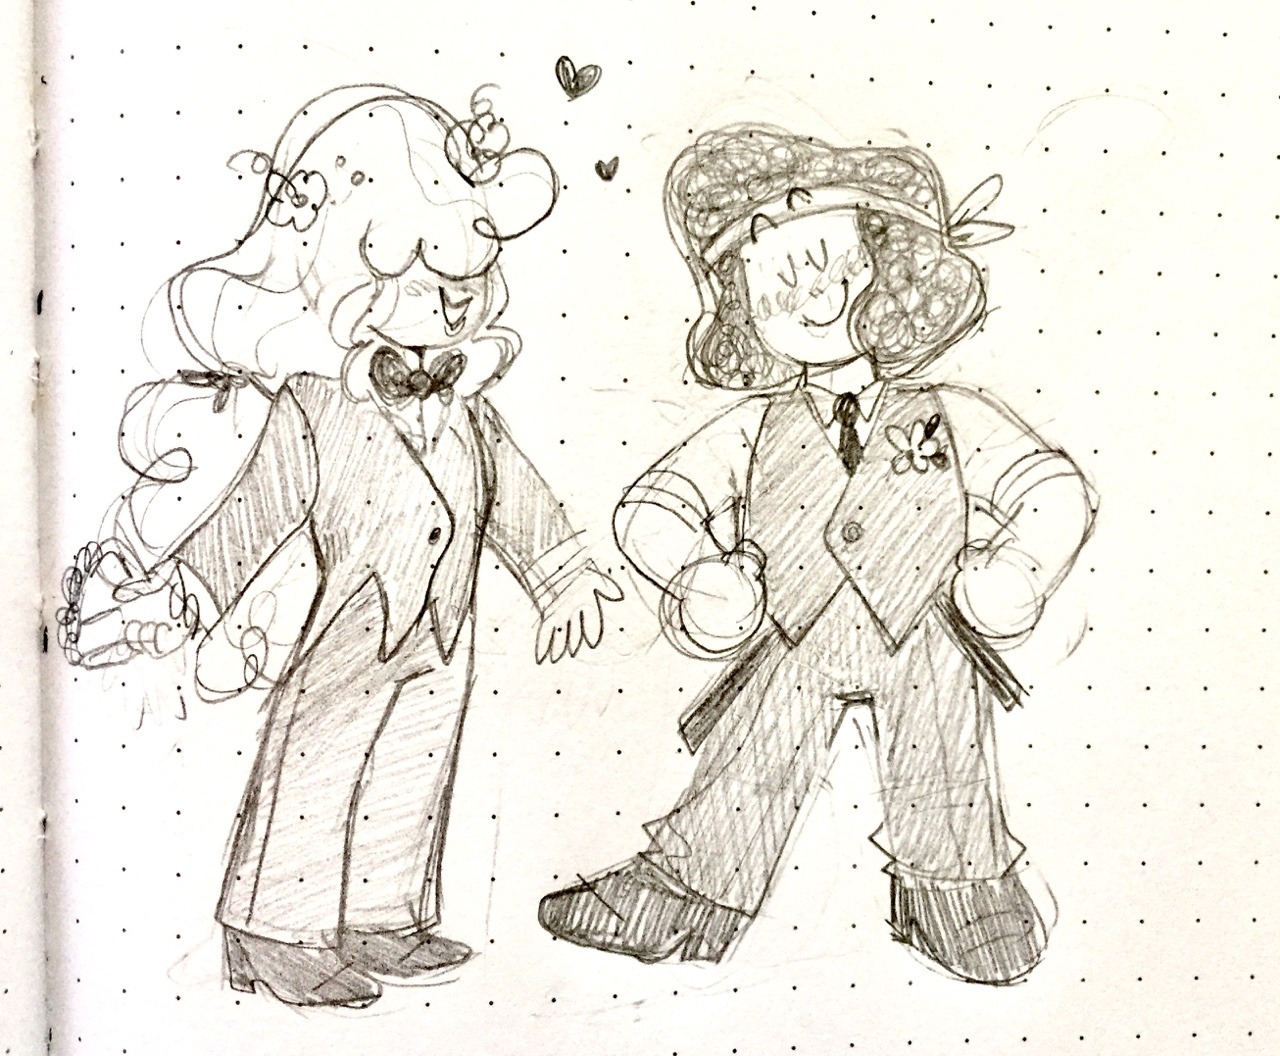 watermelonkiss: I was thinking about how cute it would be for them to do double suits